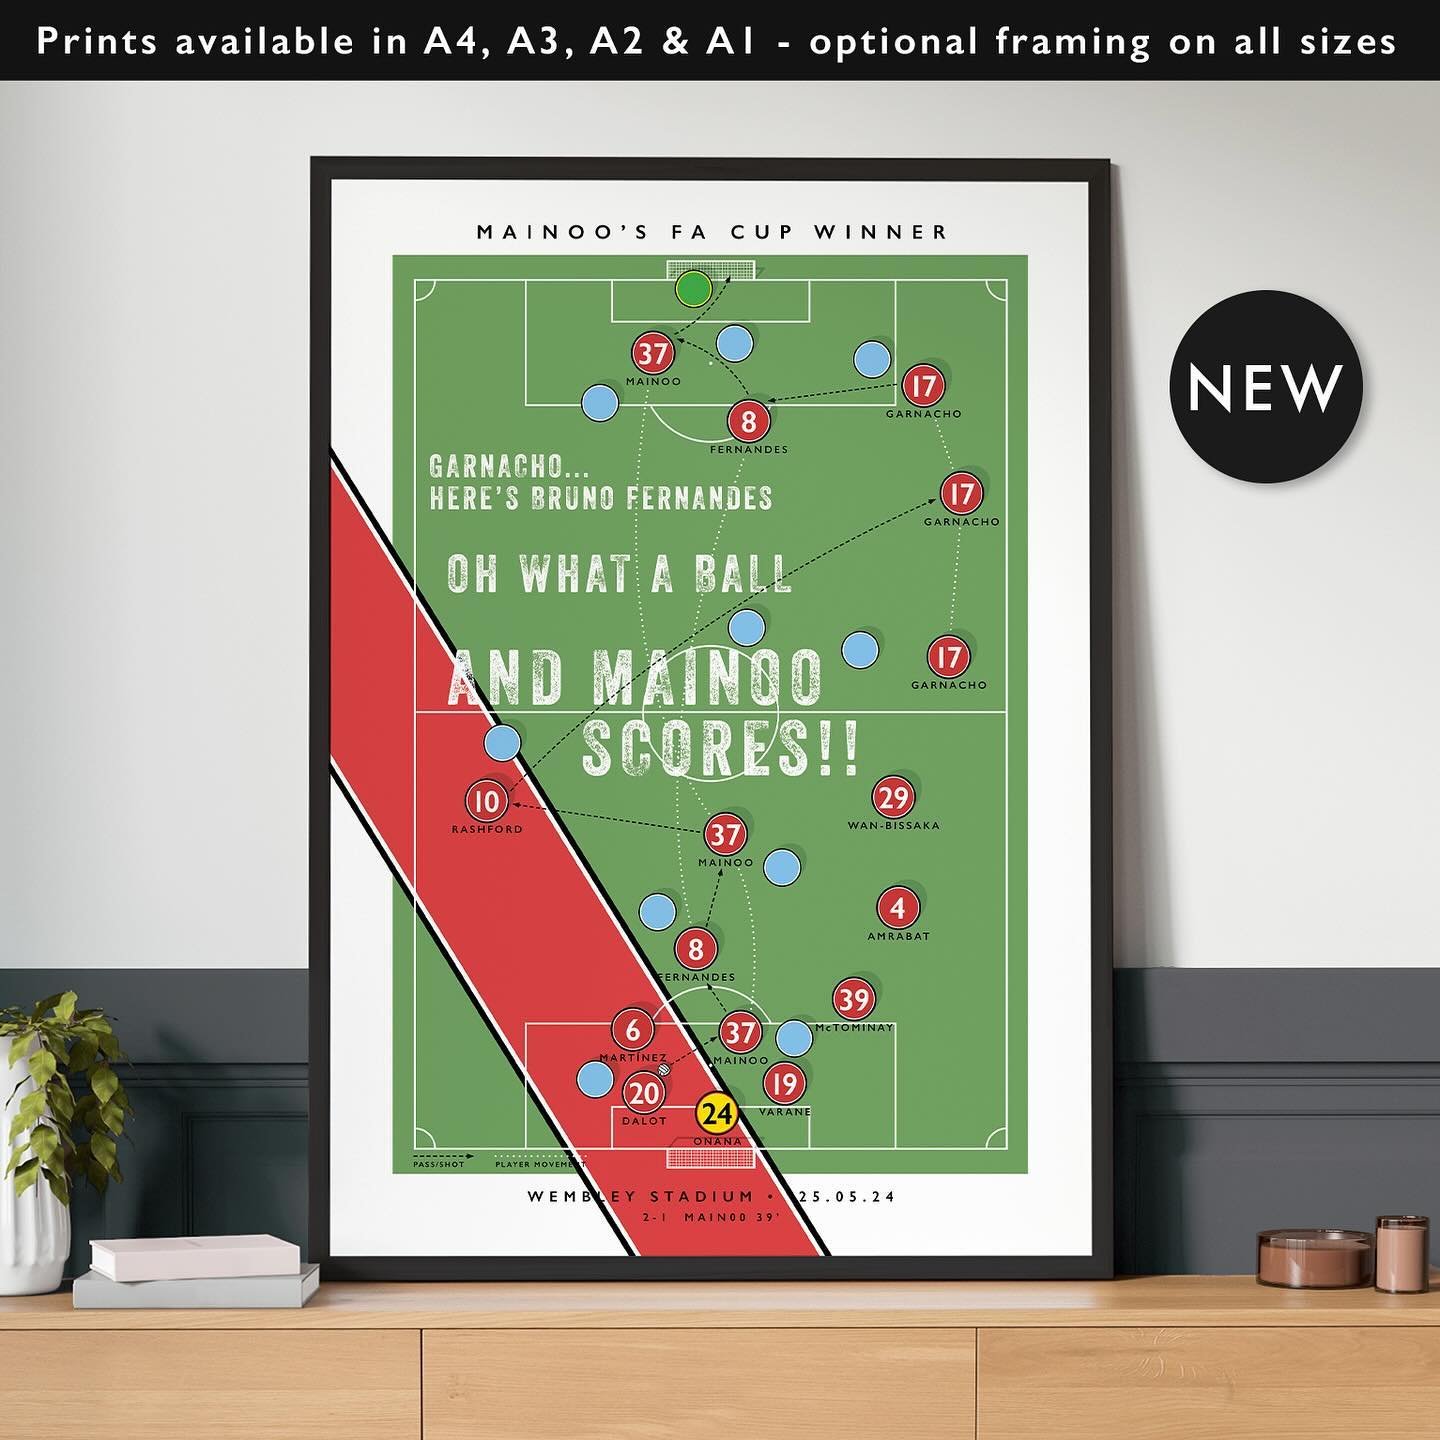 NEW: Manchester United Mainoo&rsquo;s FA Cup Winner 

Get 10% off until midnight with the discount code: 
THE-RED-DEVILS

Shop now: matthewjiwood.com/goooal/mainoo

Prints available in A4, A3, A2 &amp; A1 with optional framing

#MUFC #ManUnited #Manc